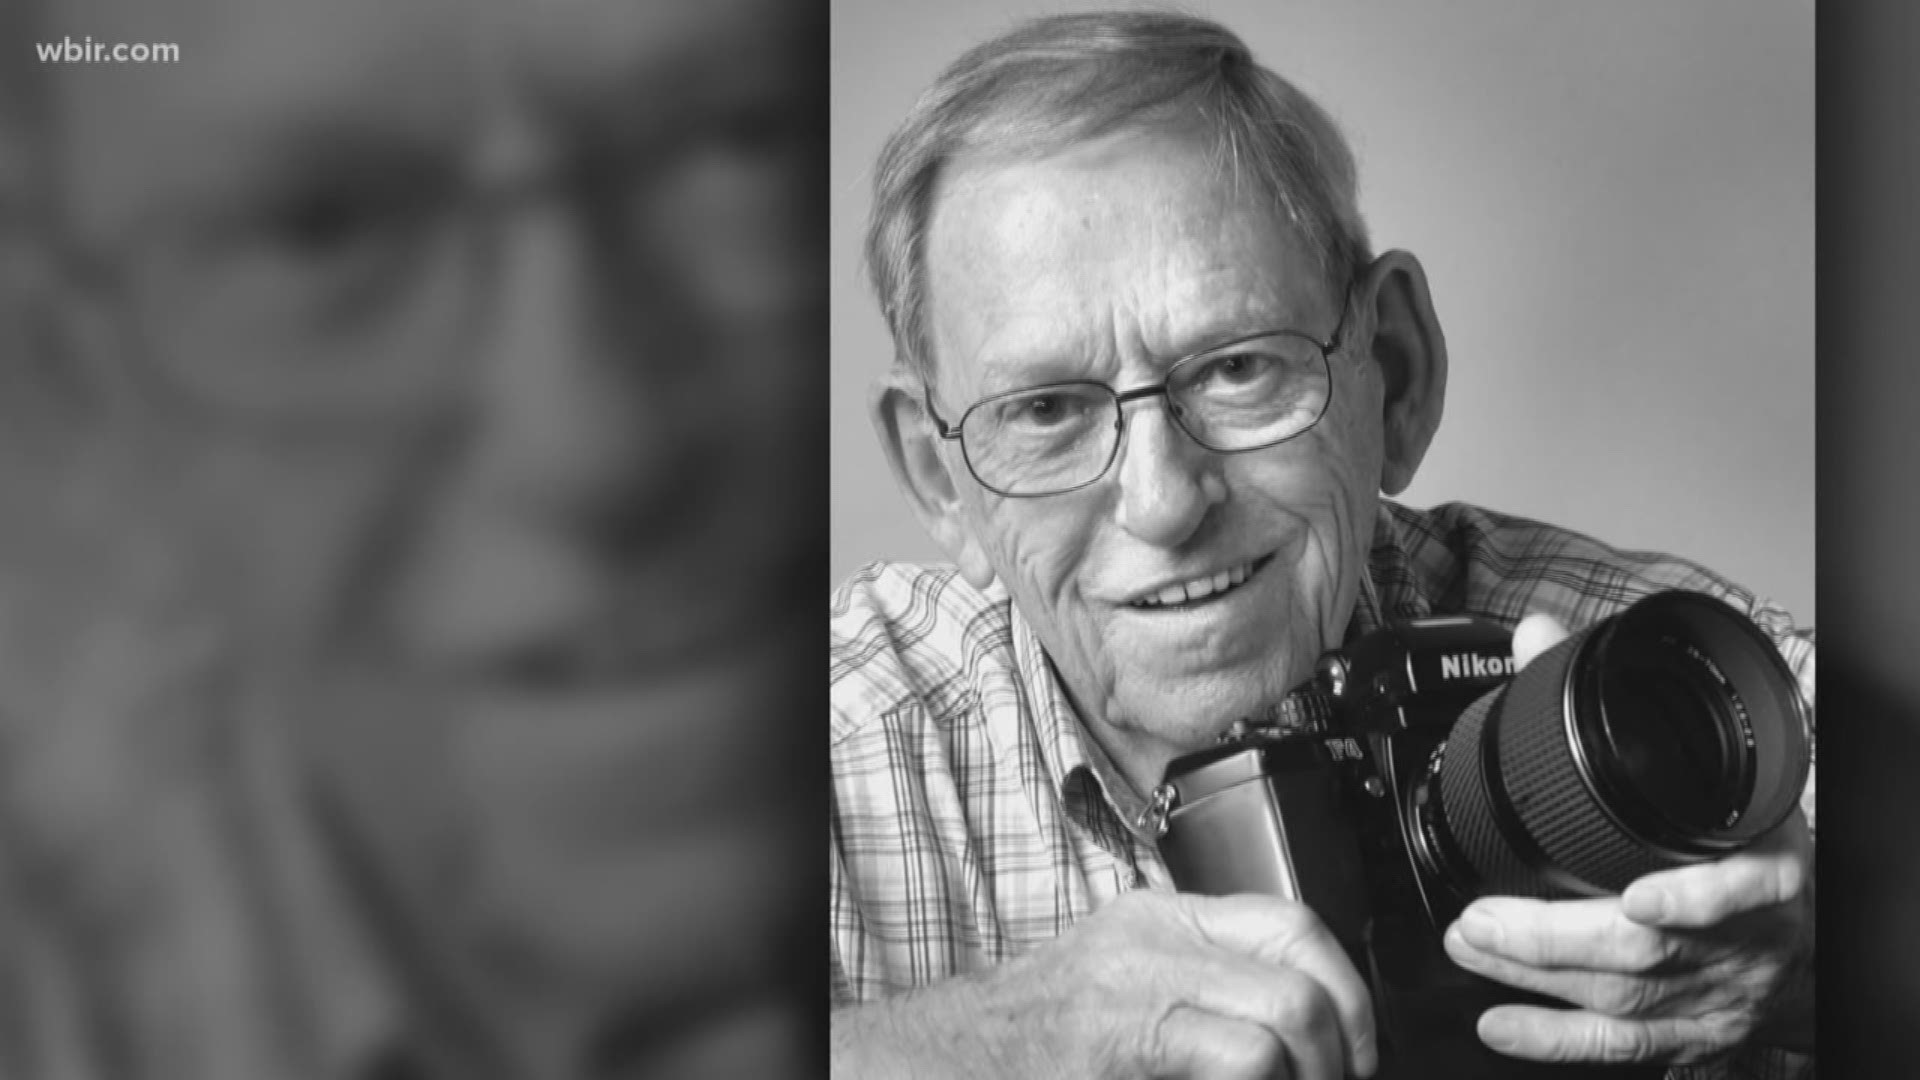 Ed Westcott, the man who showed the world what life was like in Oak Ridge during the Manhattan Project, passed away early Friday morning.